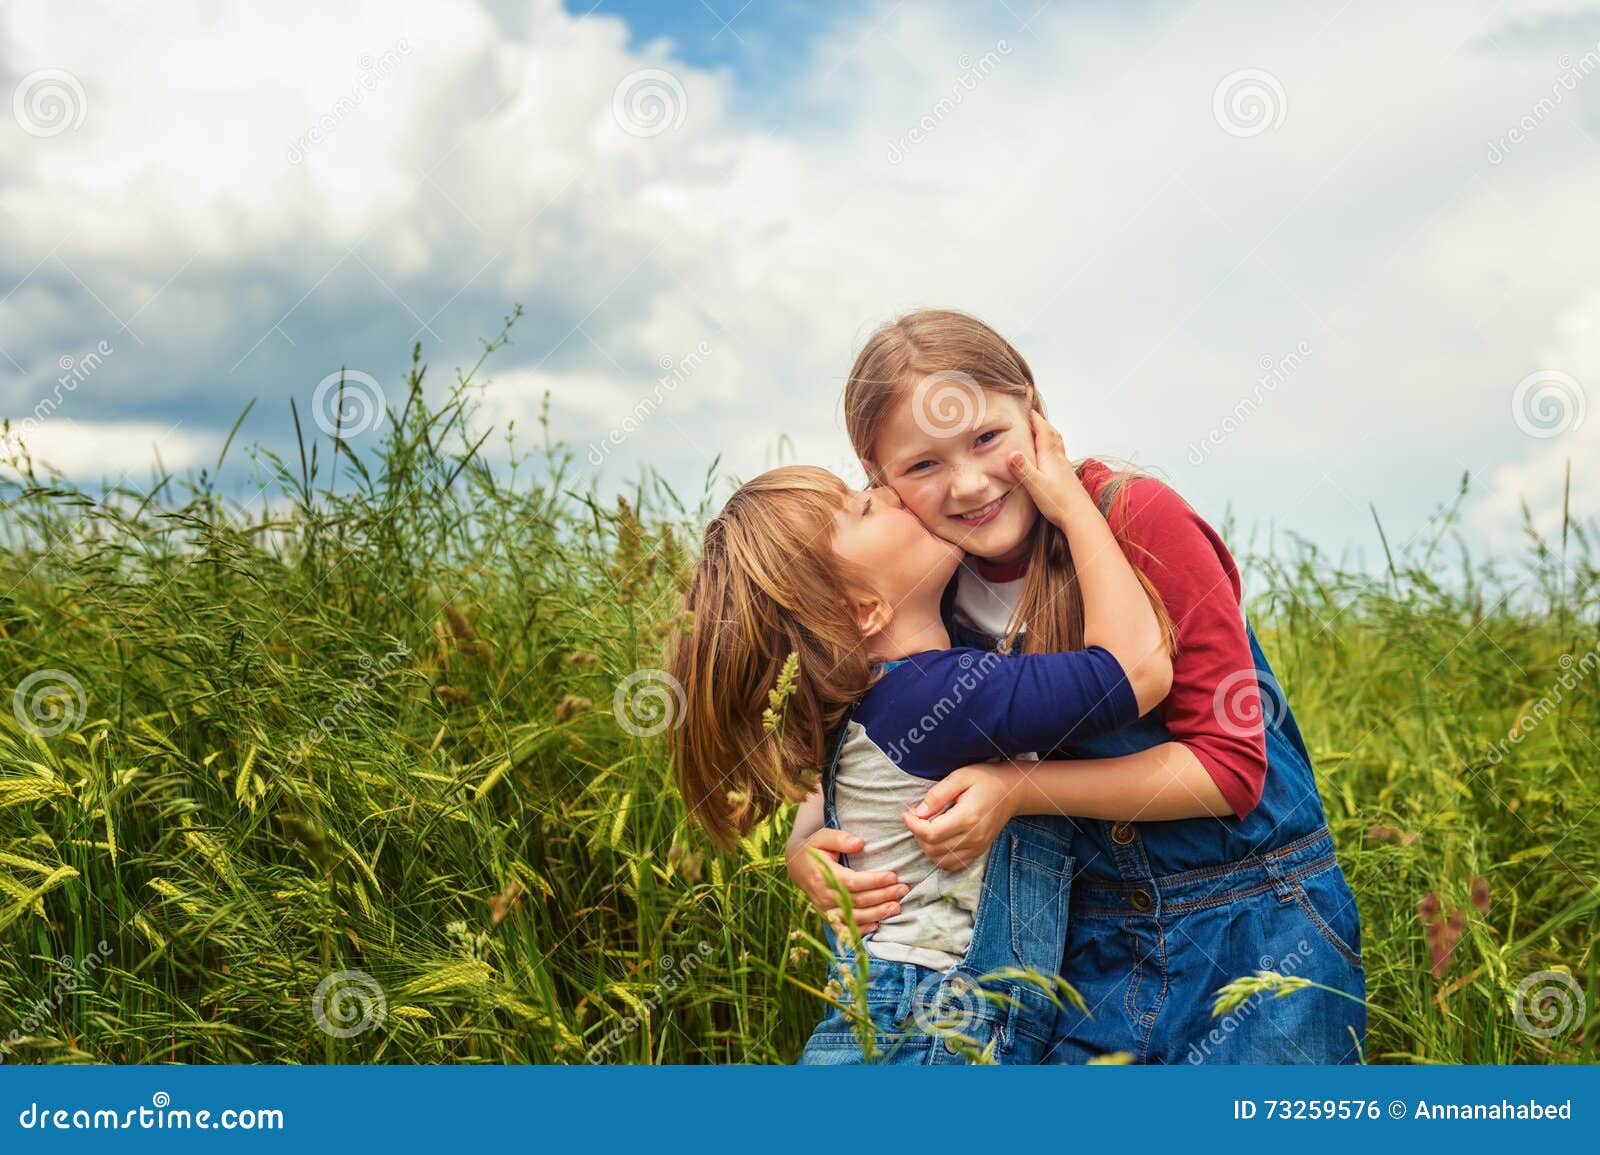 523 Two Little Kids Kissing Photos Free Royalty Free Stock Photos From Dreamstime